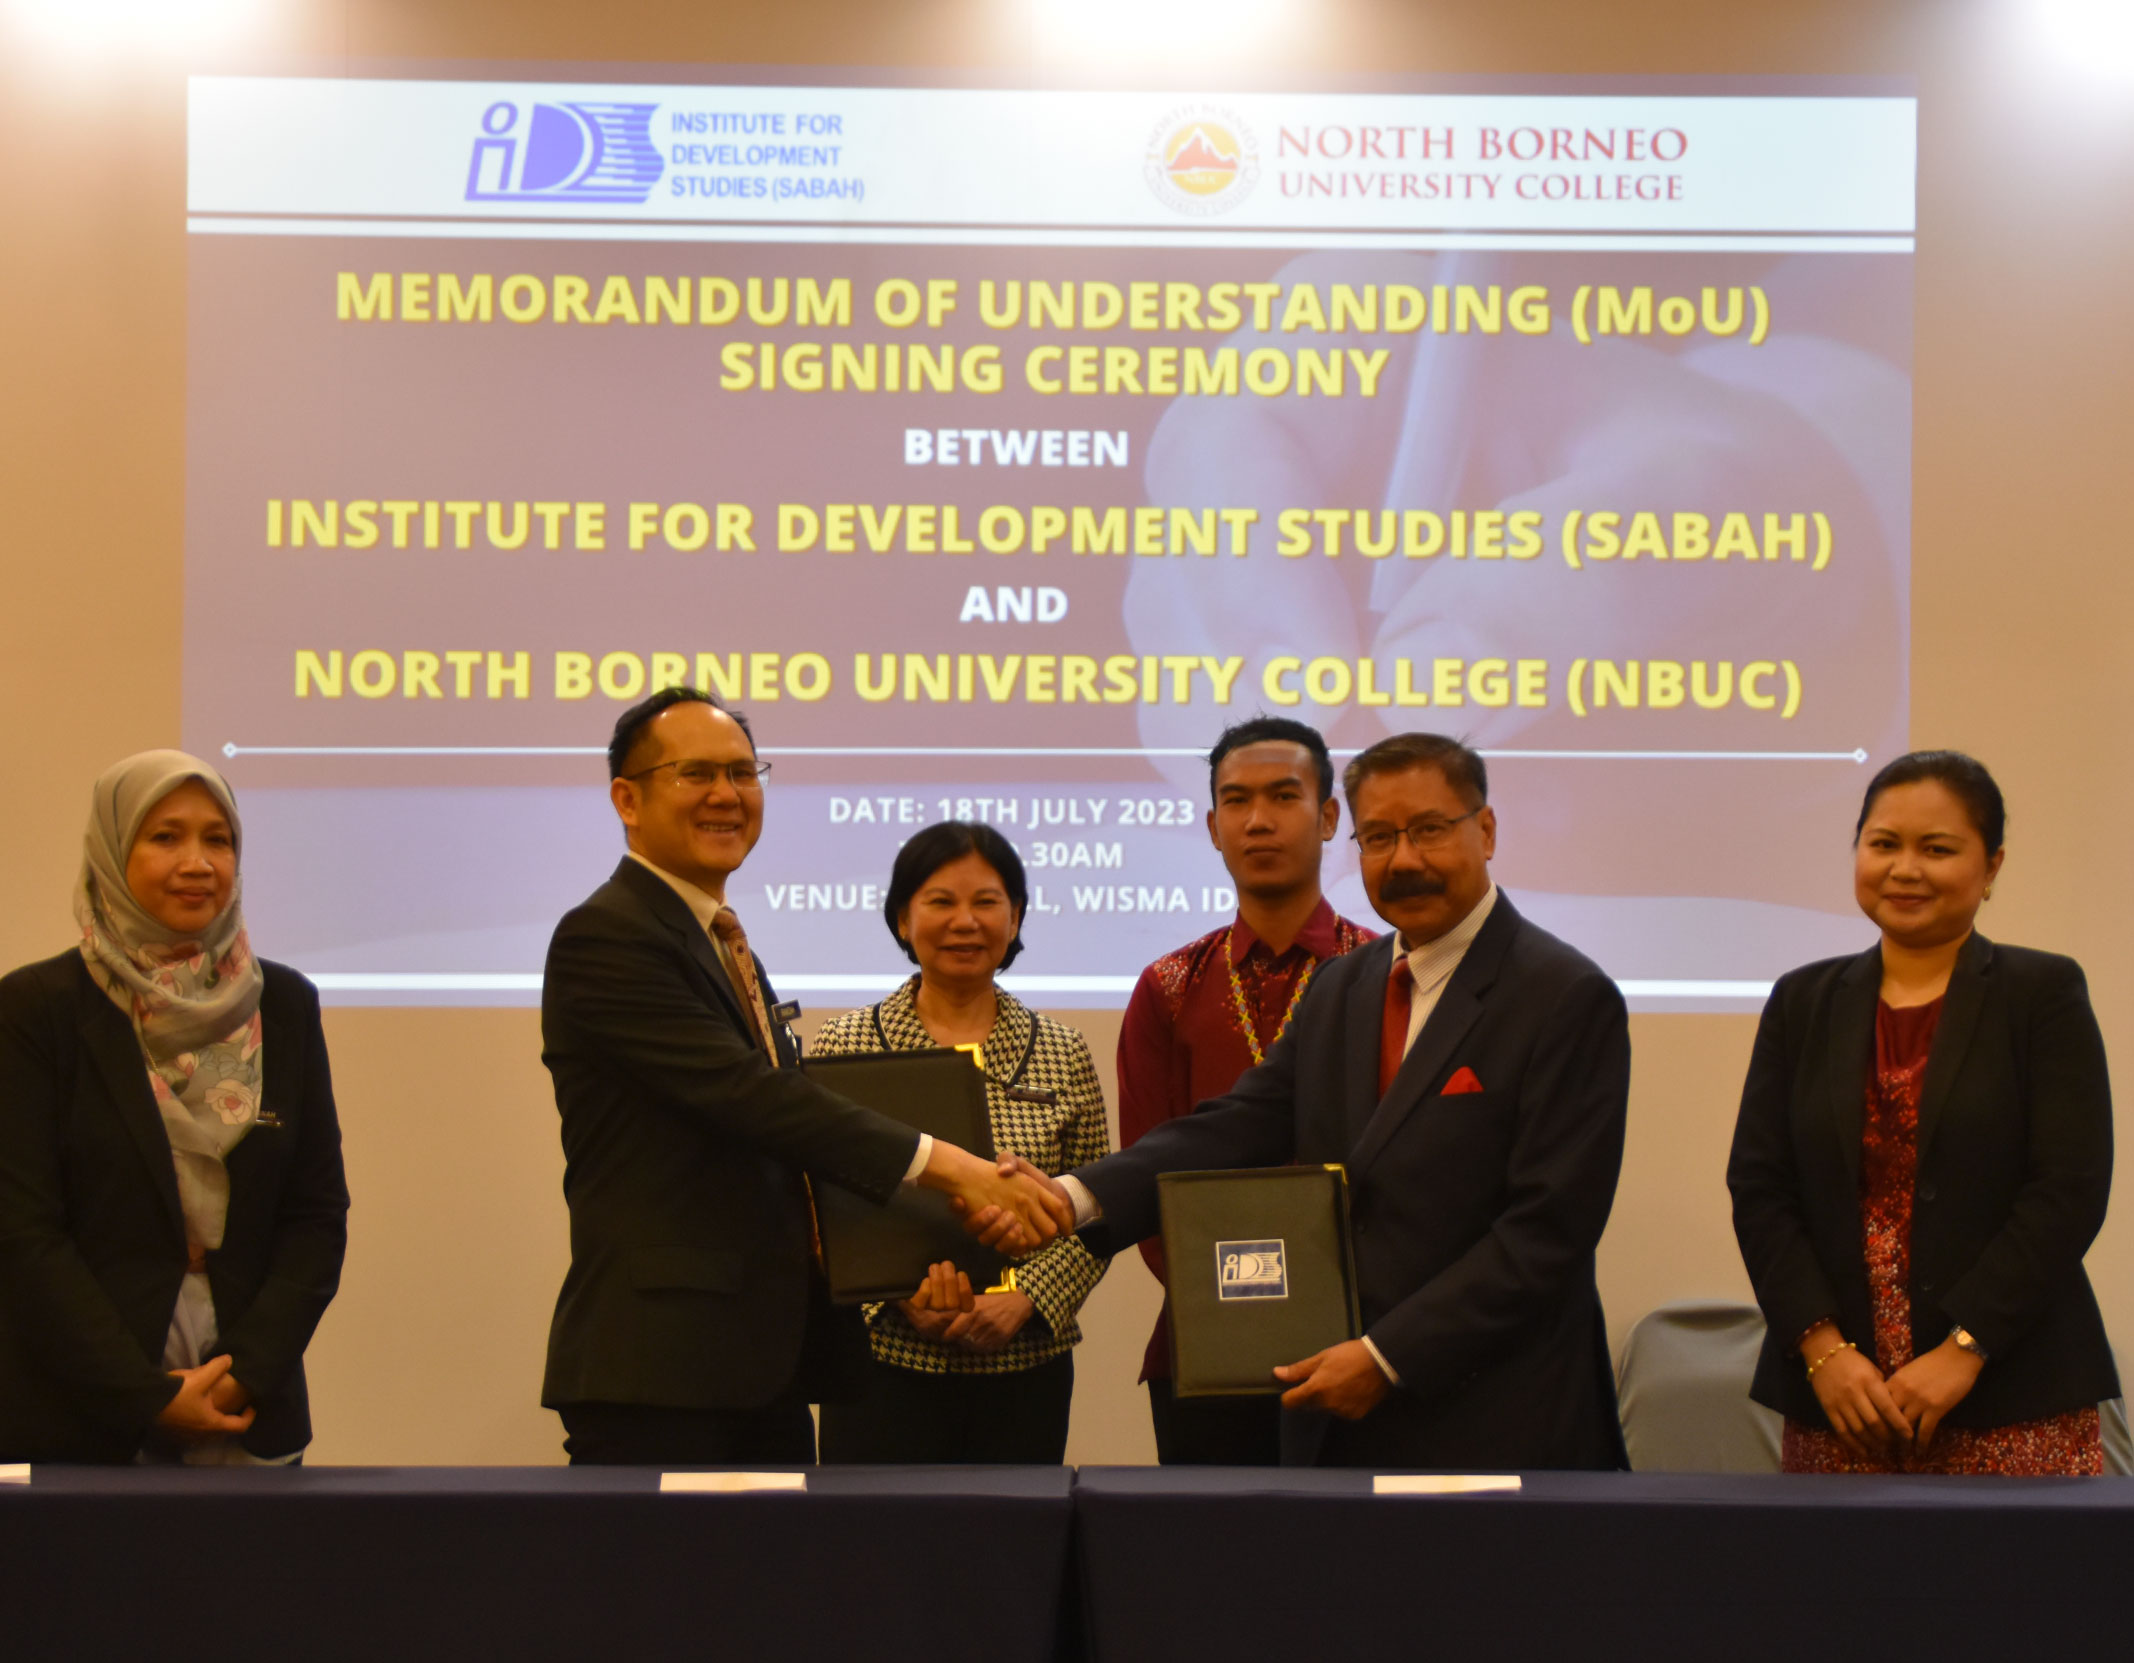 MoU between IDS and NBUC